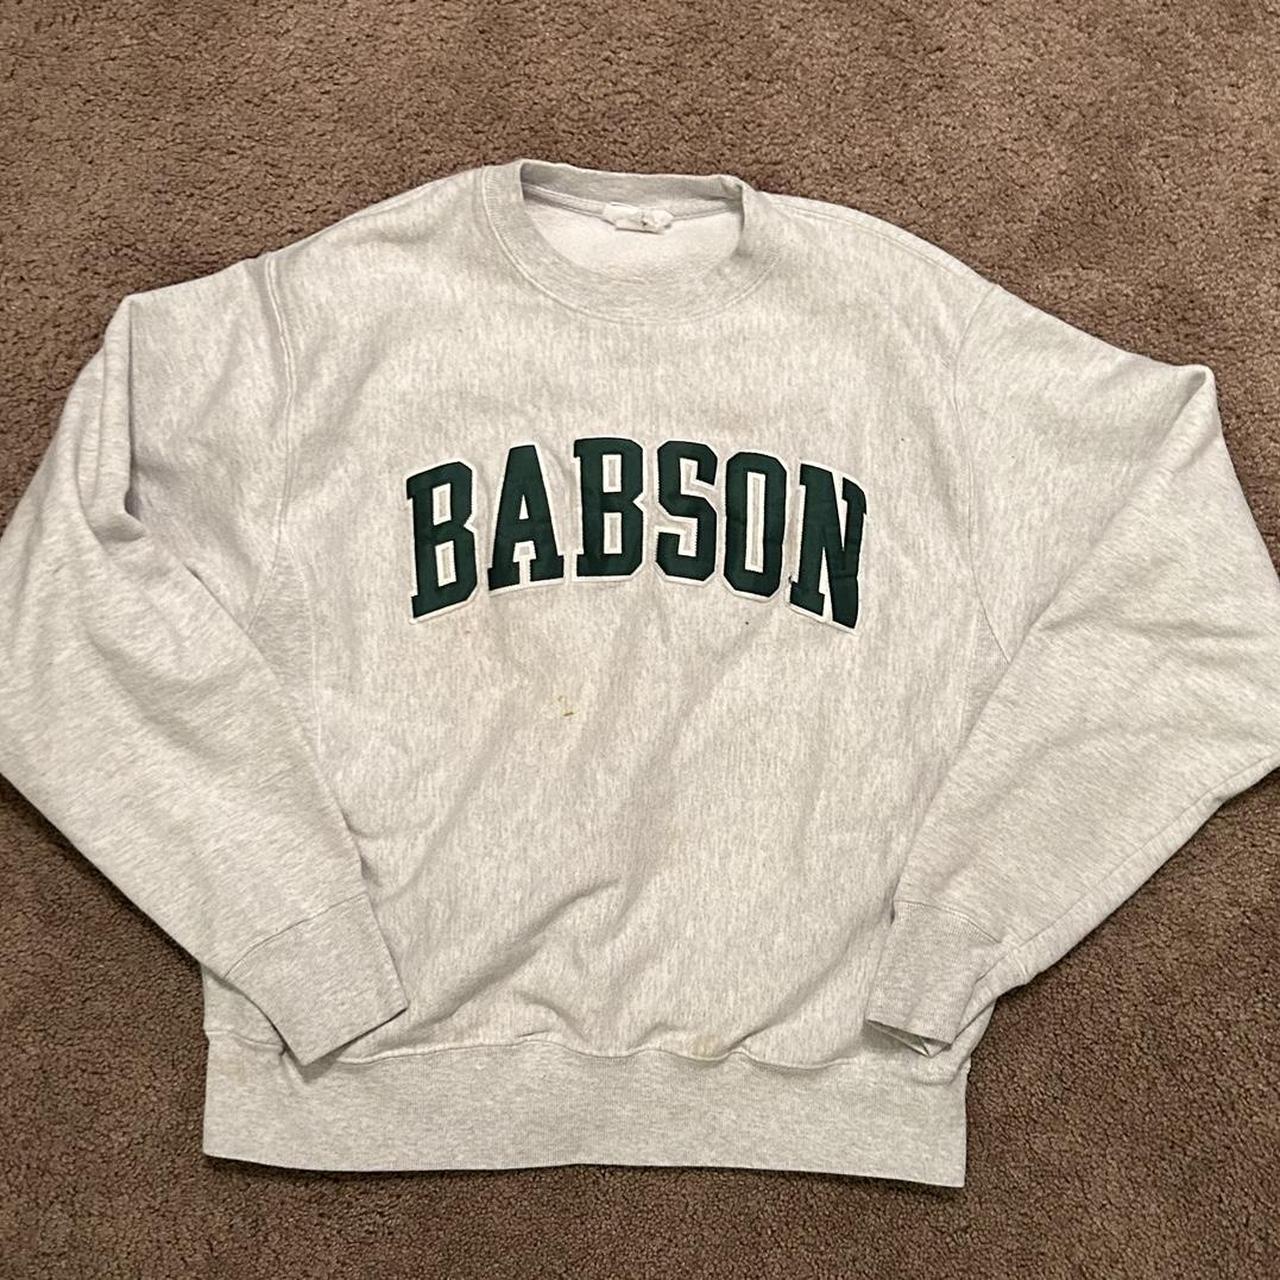 Champion Men's Grey and Green Jumper